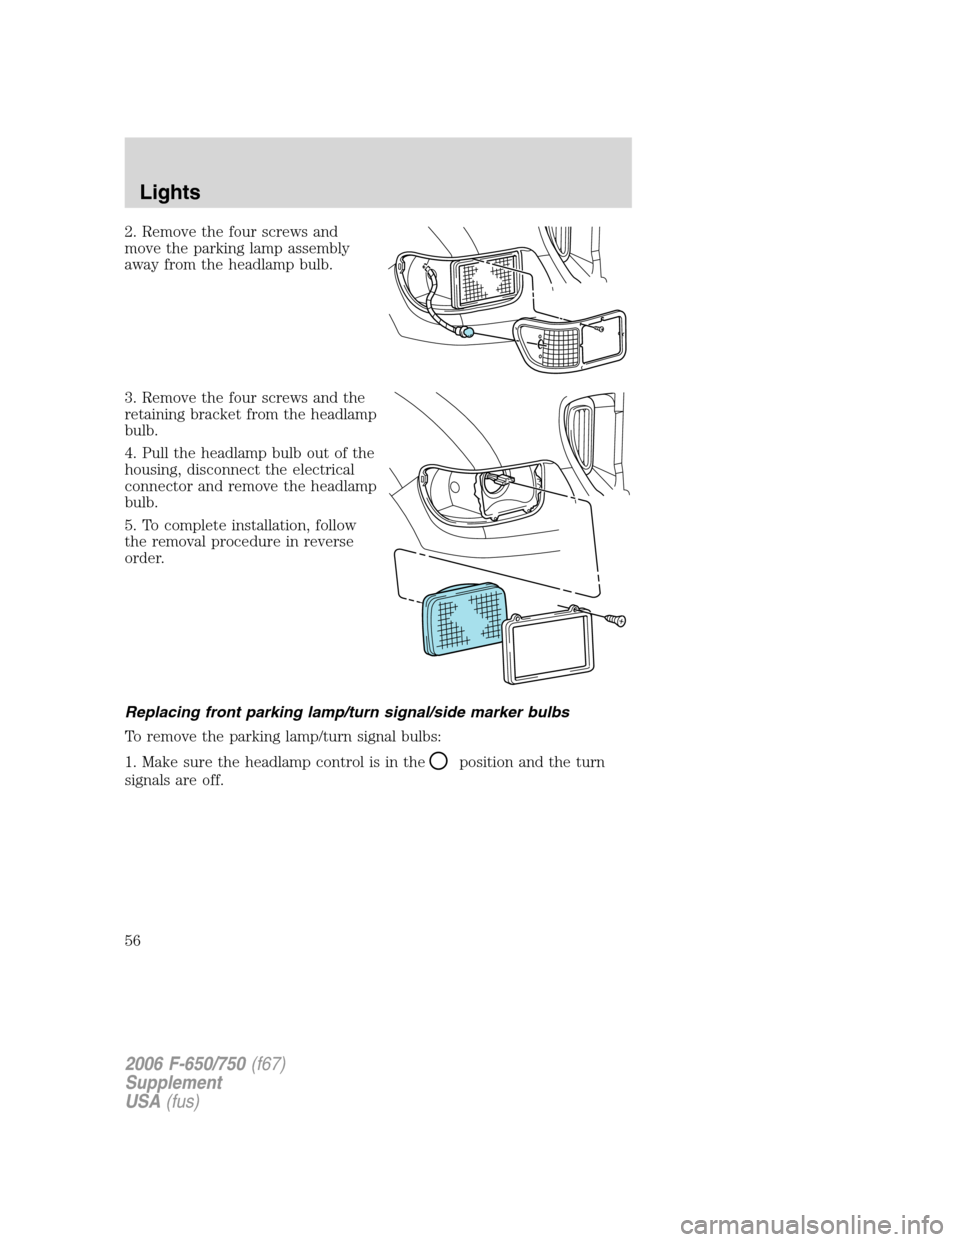 FORD F750 2006 11.G Owners Manual 2. Remove the four screws and
move the parking lamp assembly
away from the headlamp bulb.
3. Remove the four screws and the
retaining bracket from the headlamp
bulb.
4. Pull the headlamp bulb out of t